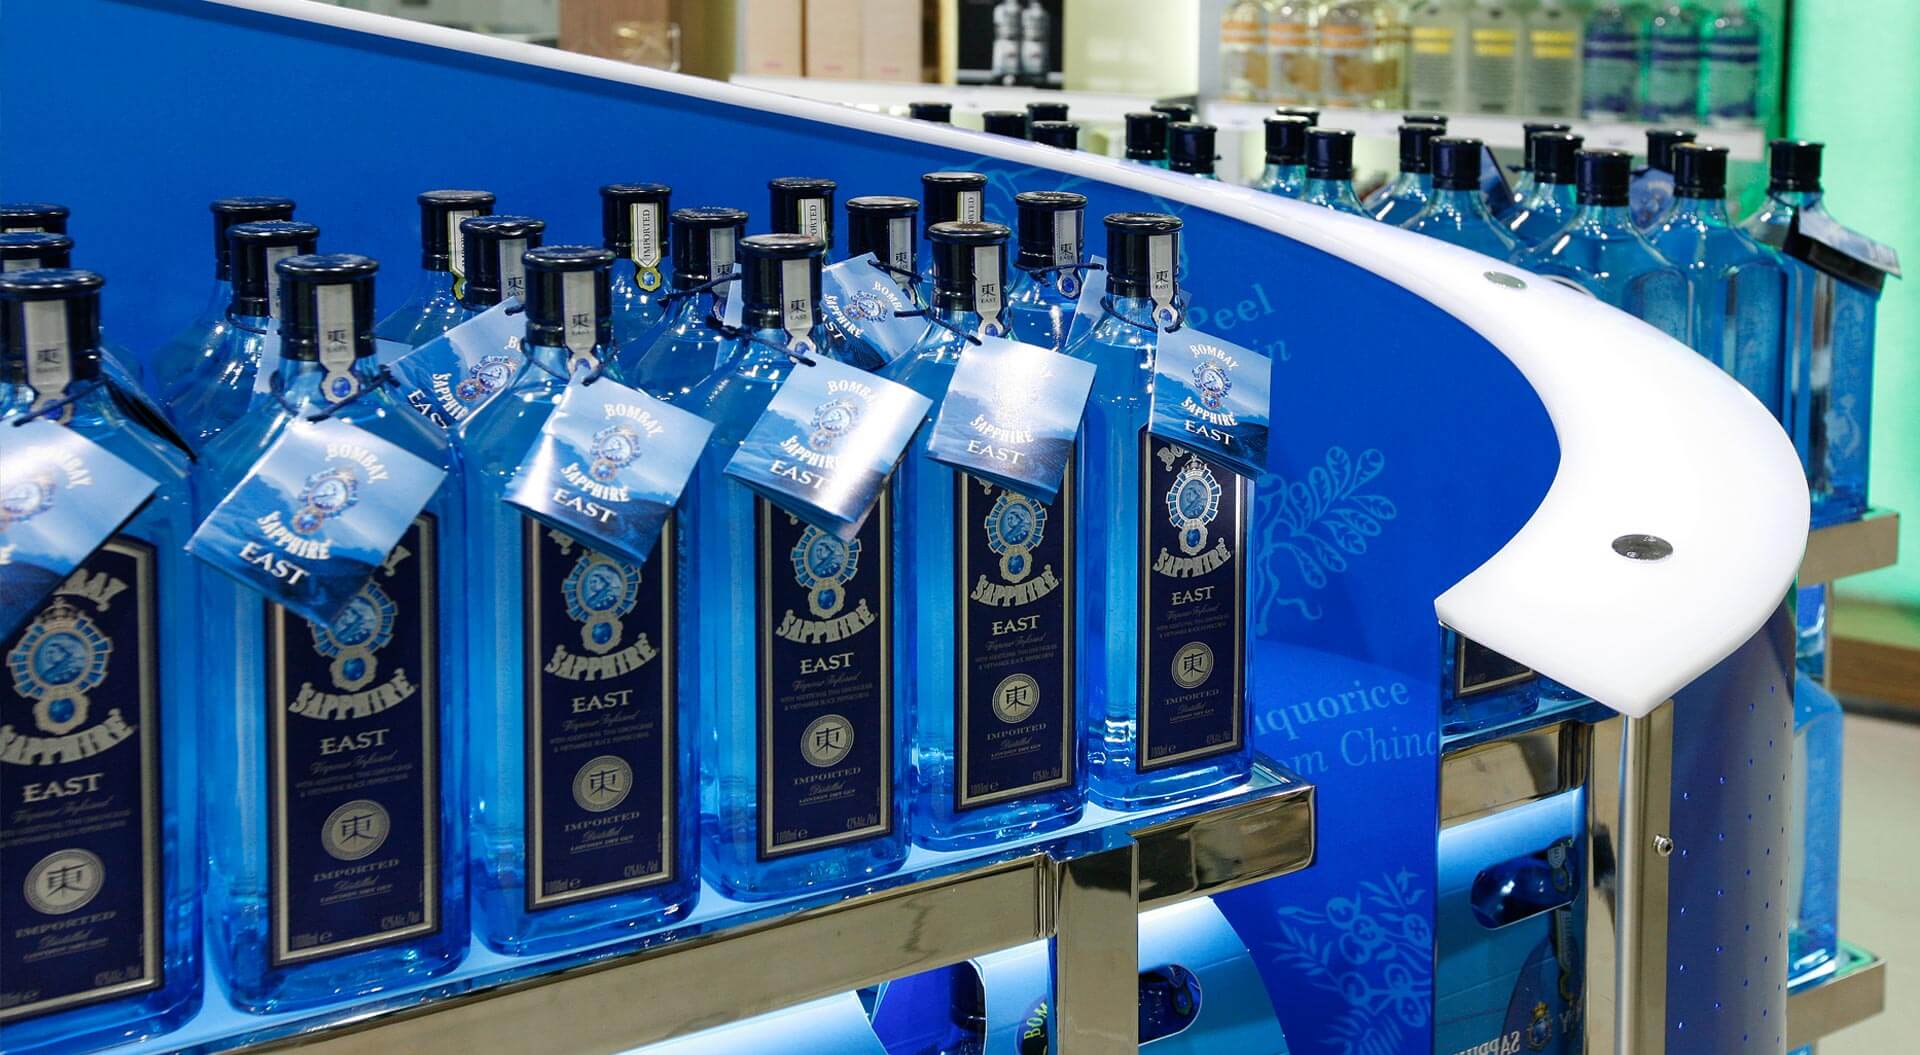 Bacardi Bombay Sapphire spirits industry unique merchandising systems design at Sydney airport for duty free travel retail